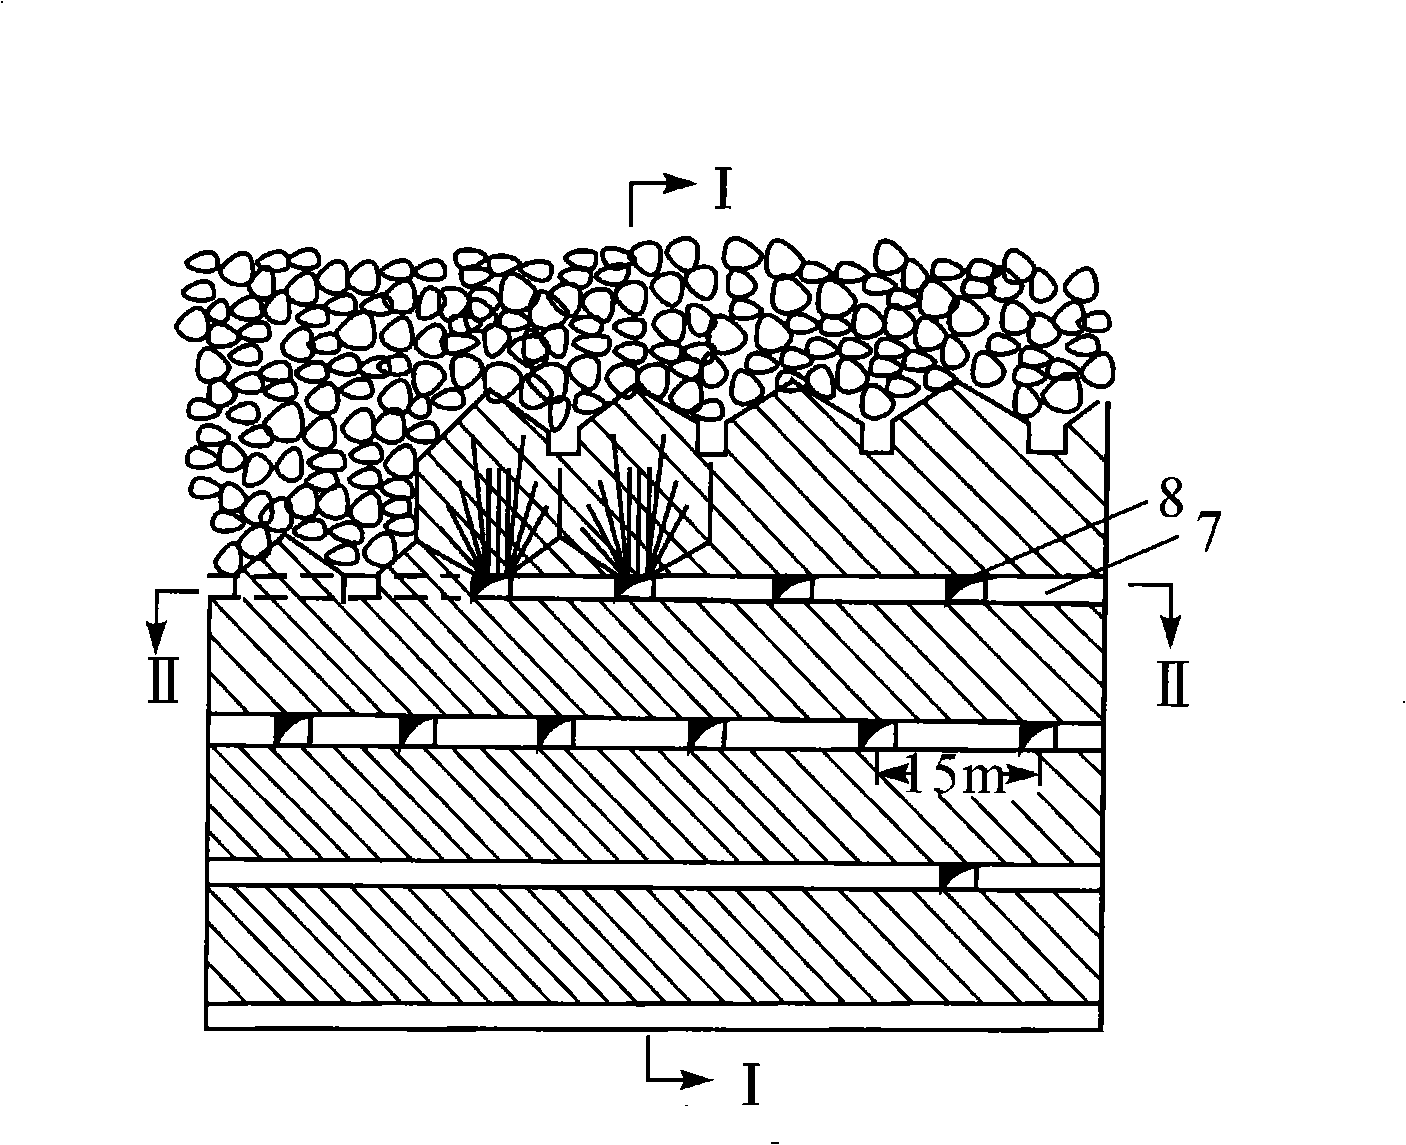 Non-pillar sublevel caving mining method for direct loading for ore